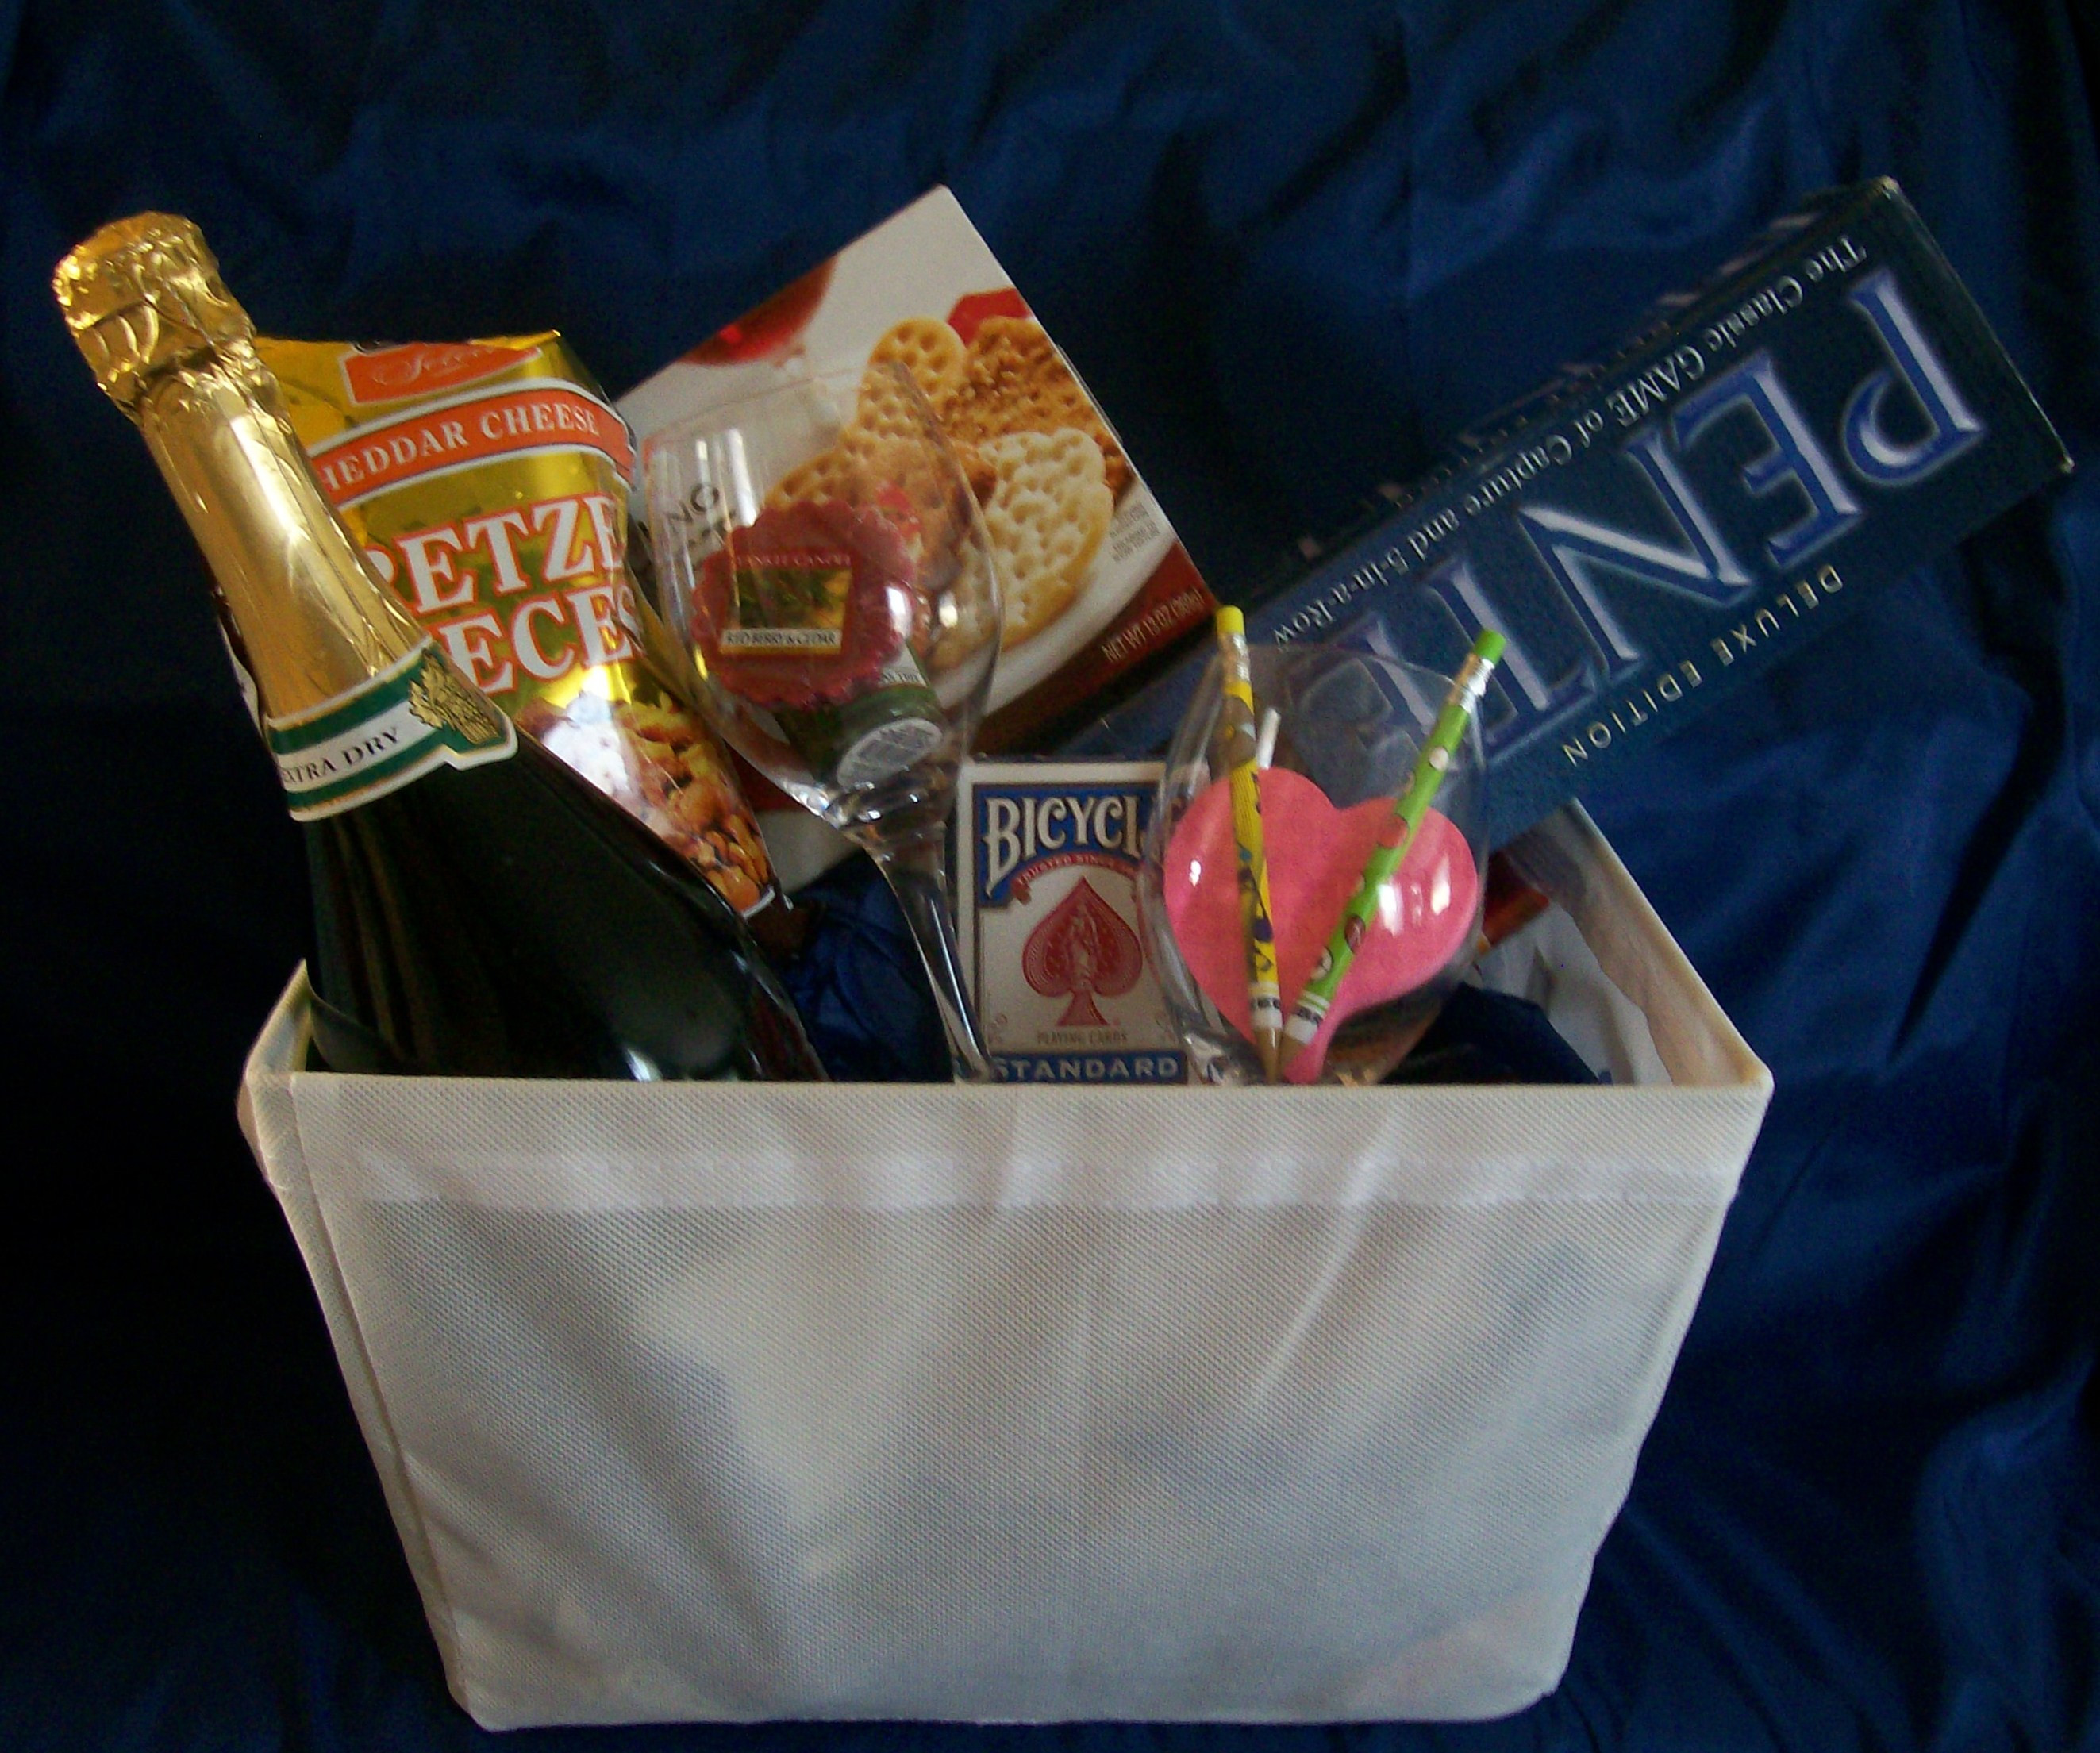 Couple Gift Basket Ideas
 Game Gift Basket Ideas for a Couple – All About Fun and Games